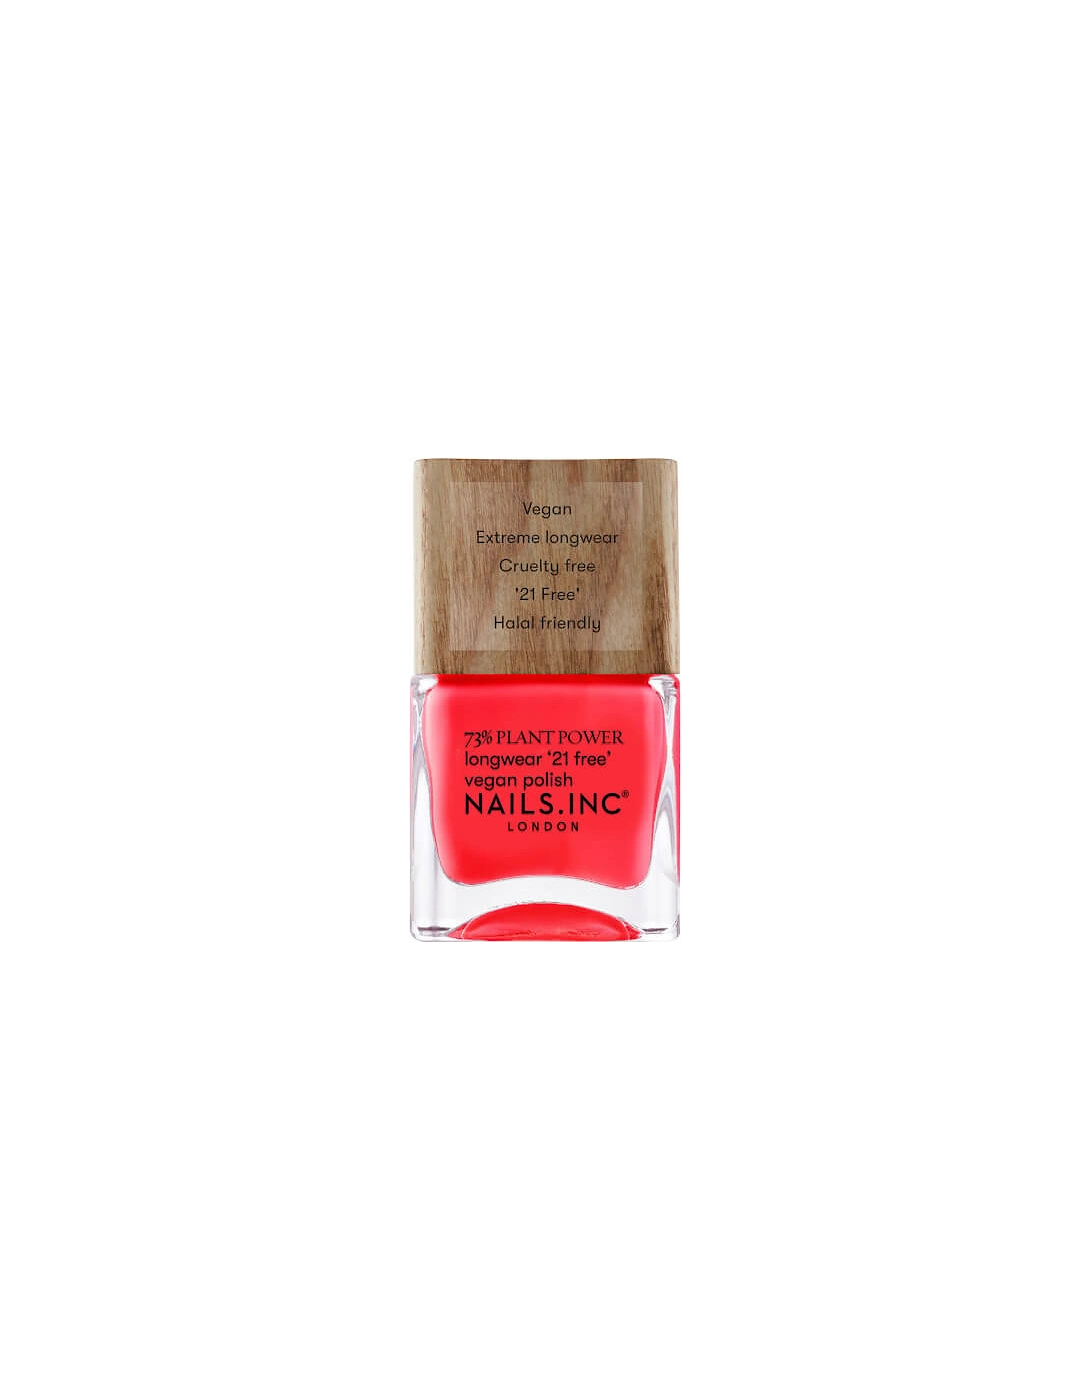 nails inc. 73% Plant Power Nail Varnish - Time for a Reset 14ml - nails inc., 2 of 1